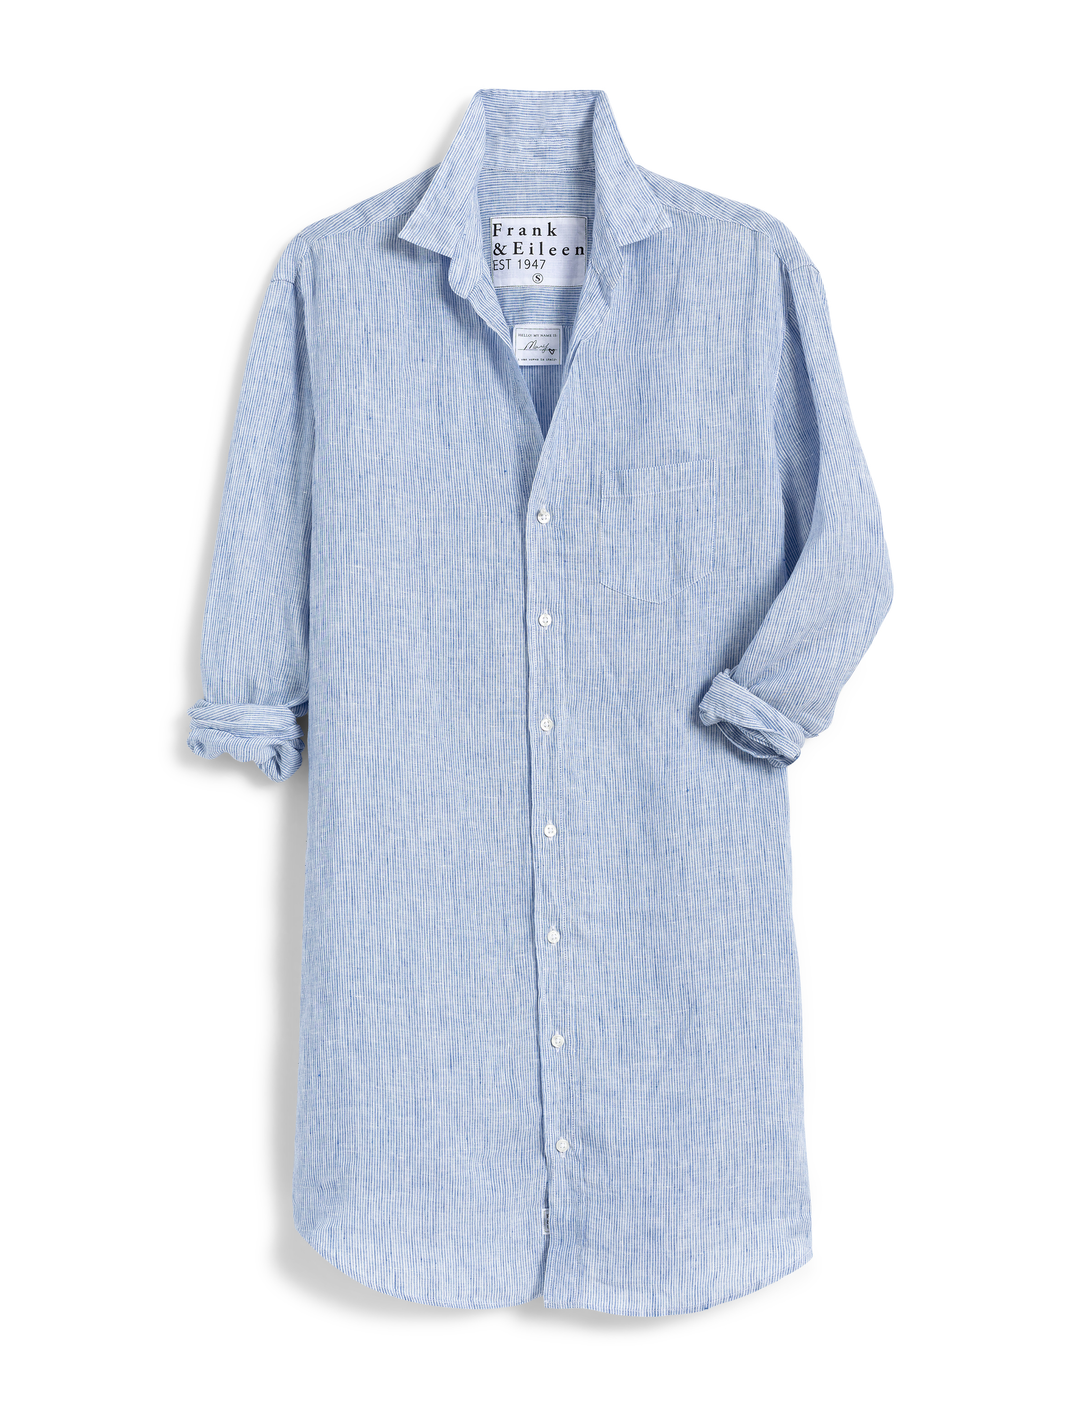 Frank & Eileen - Mary Woven Button Up Dress in Thin Blue Stripe